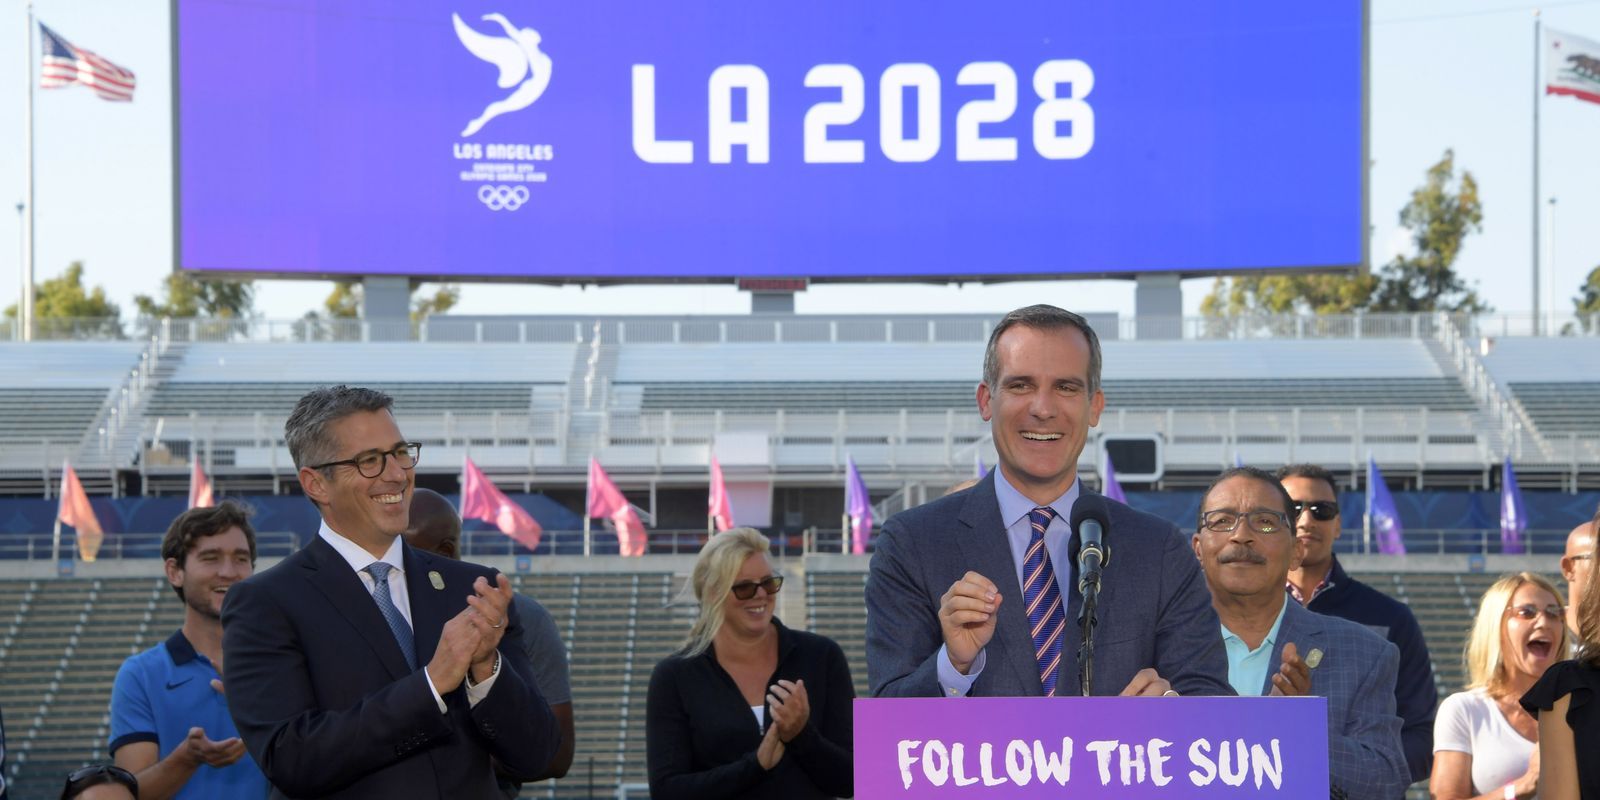 Academy Faculty Member Predicts LA 2028 will Spark ‘Olympic Spirit’ in America